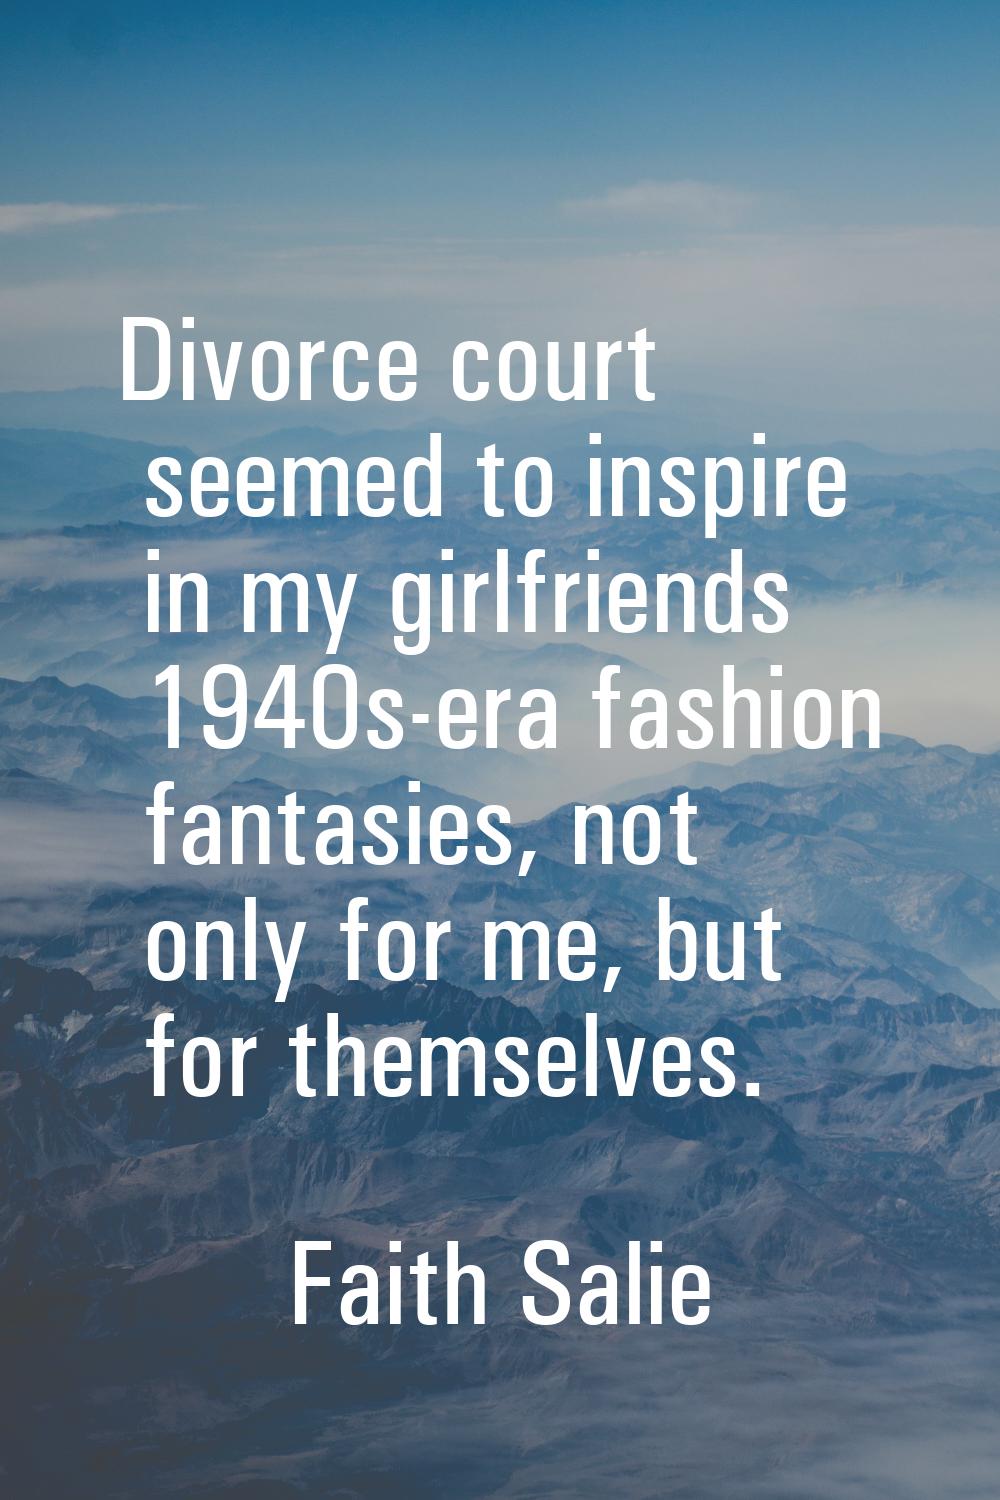 Divorce court seemed to inspire in my girlfriends 1940s-era fashion fantasies, not only for me, but